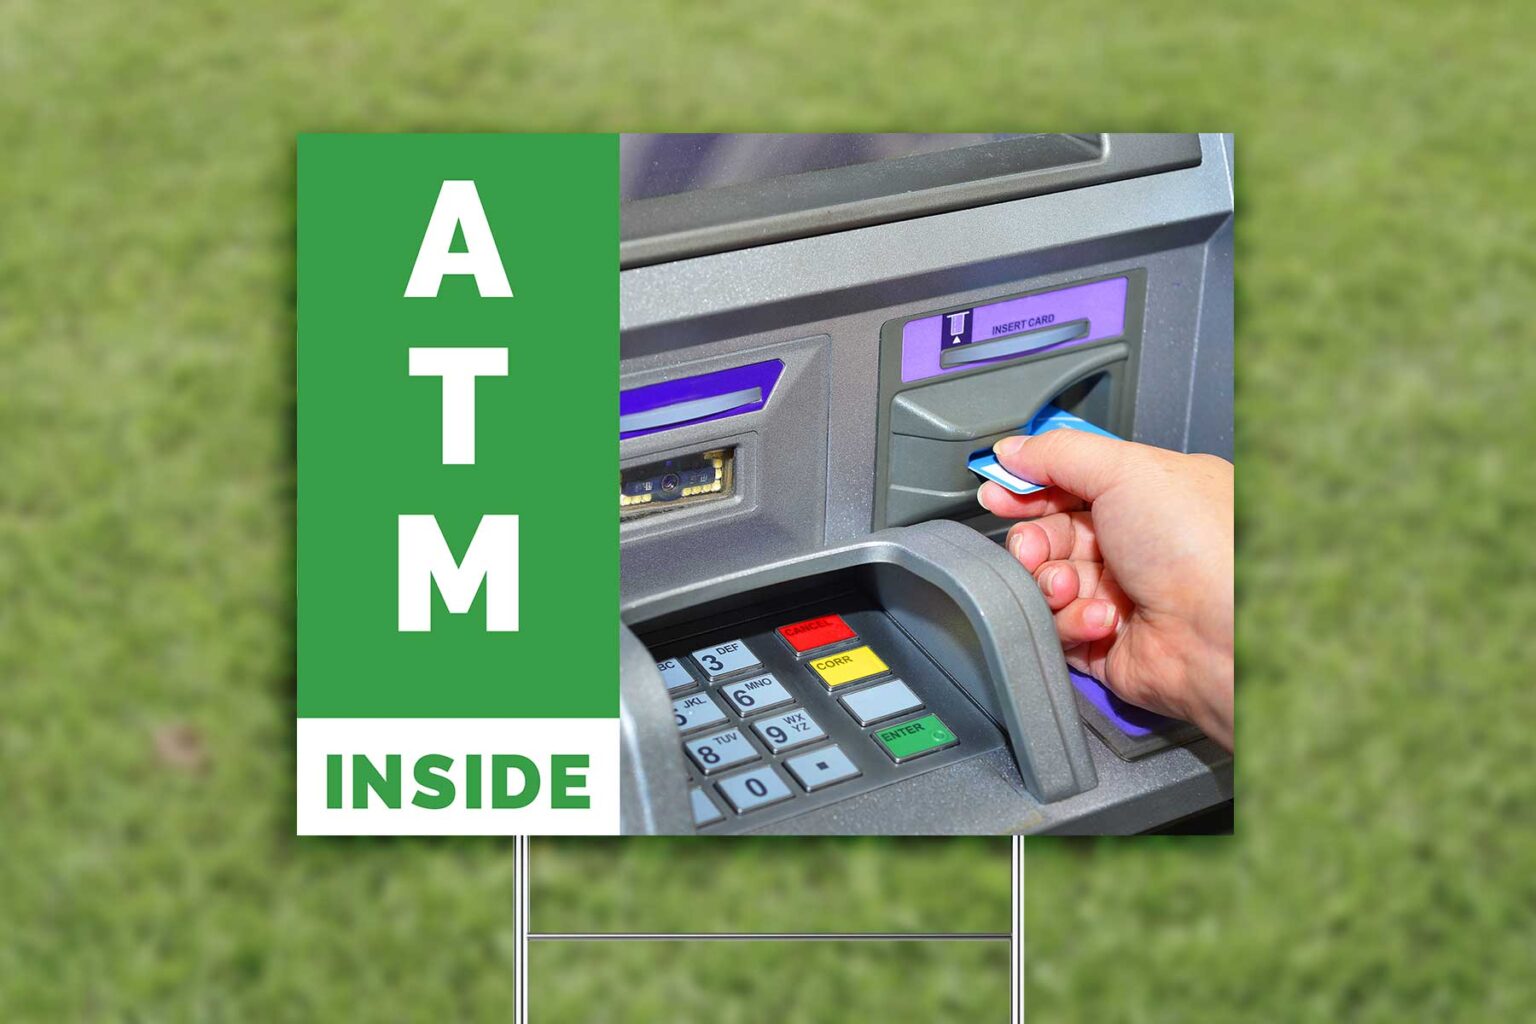 Yard Sign for Grass with ATM Inside Graphic